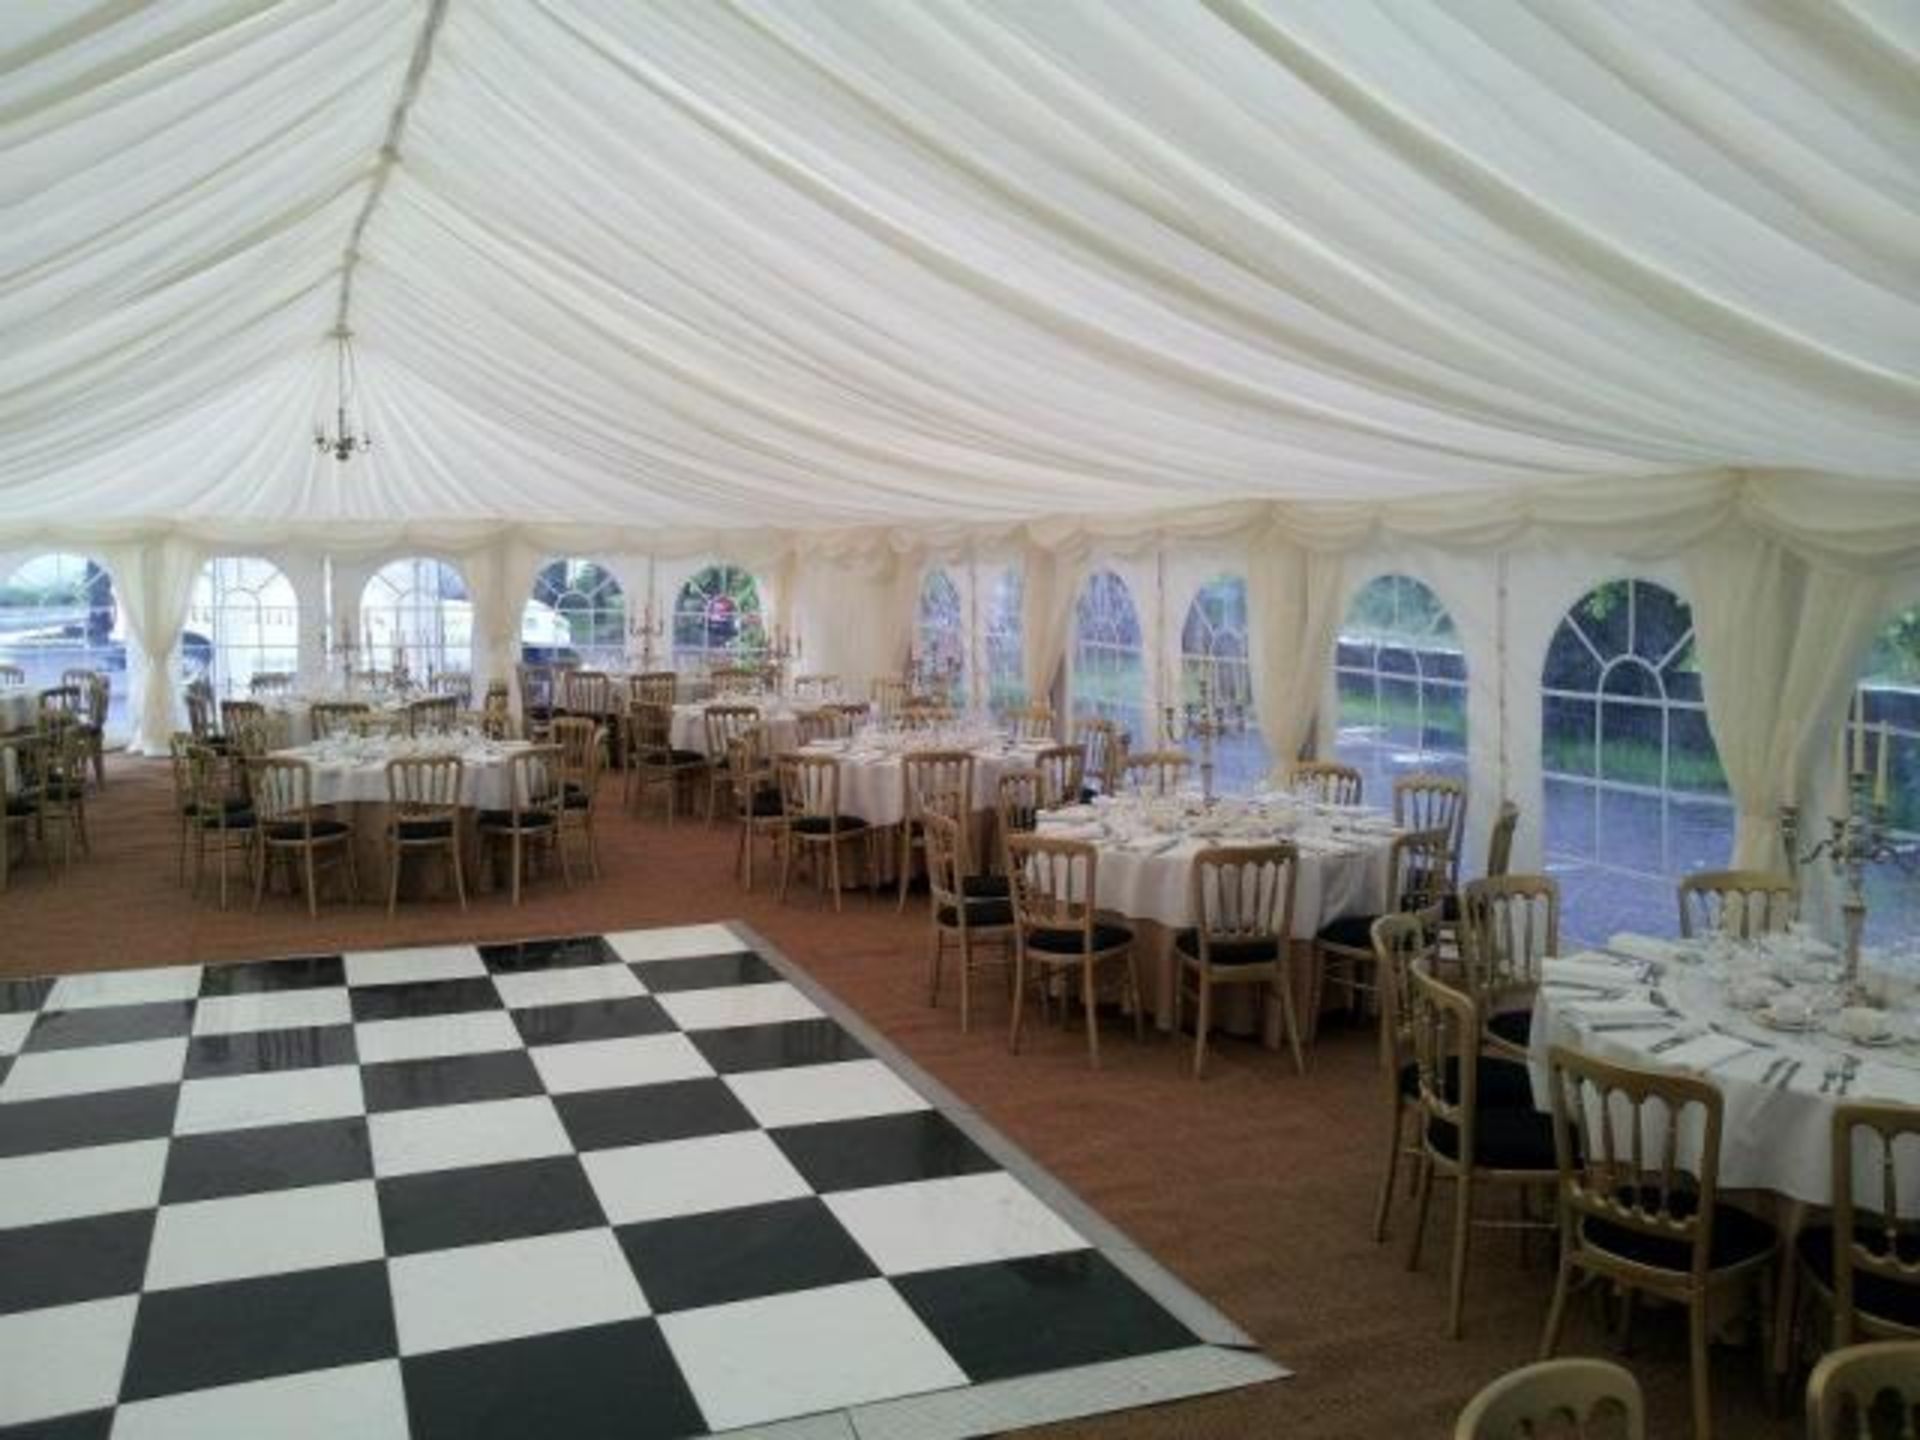 Grumpy Joe’s Acrylic 16ft x 16ft Black and White Chequered Dance Floor with Carry Trolley